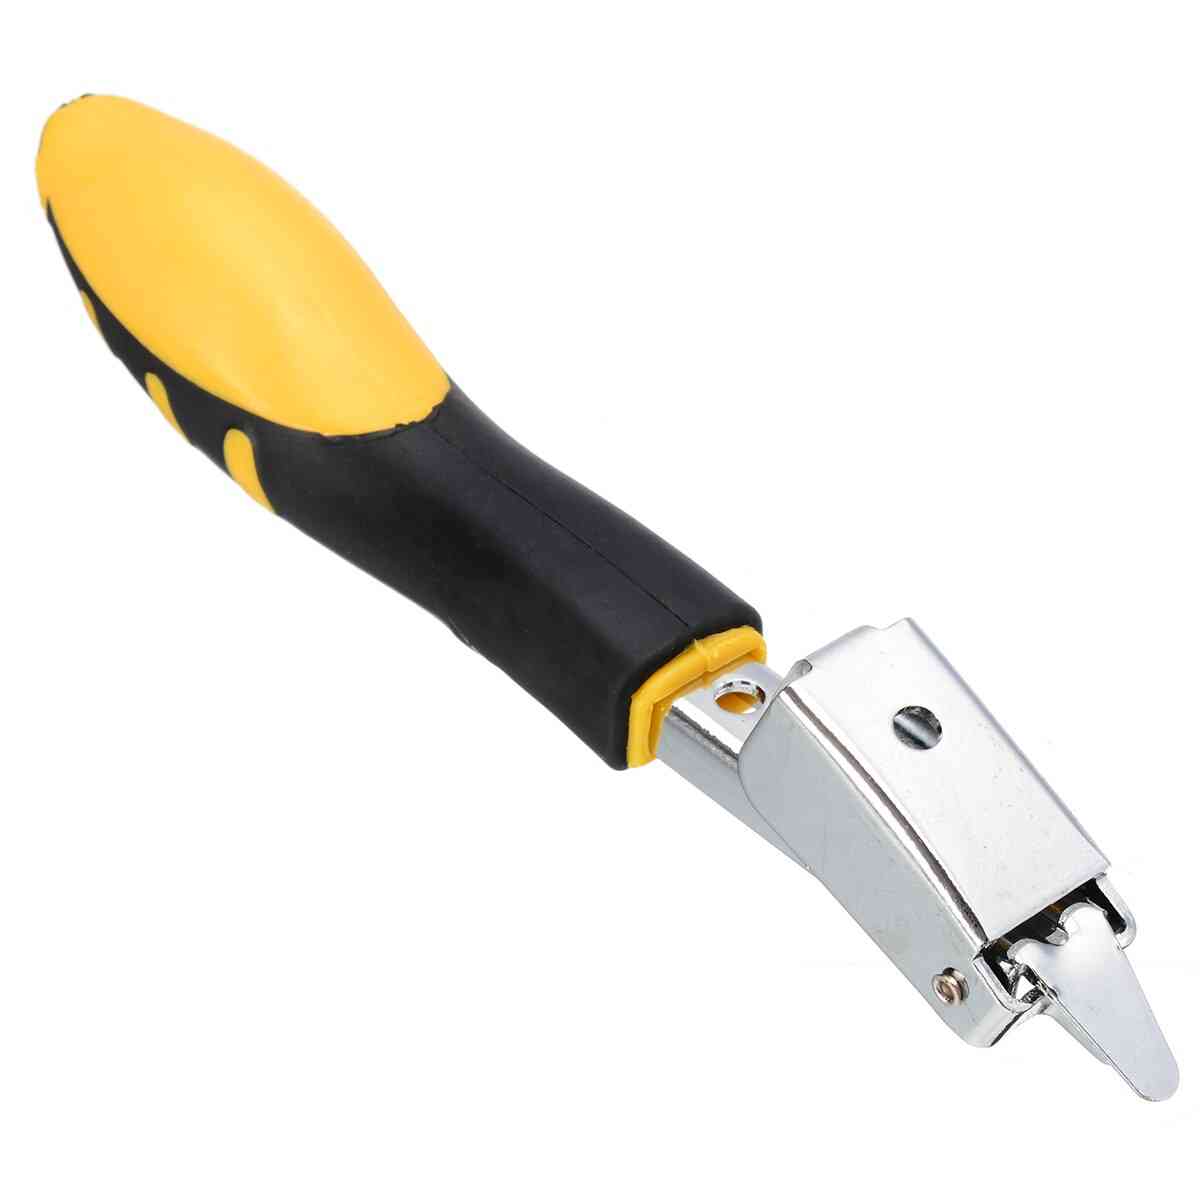 Wood Door Upholstery Construction Staple Remover, Tack Lifter Office Claw, Nailers Woodworking, Removing Tool